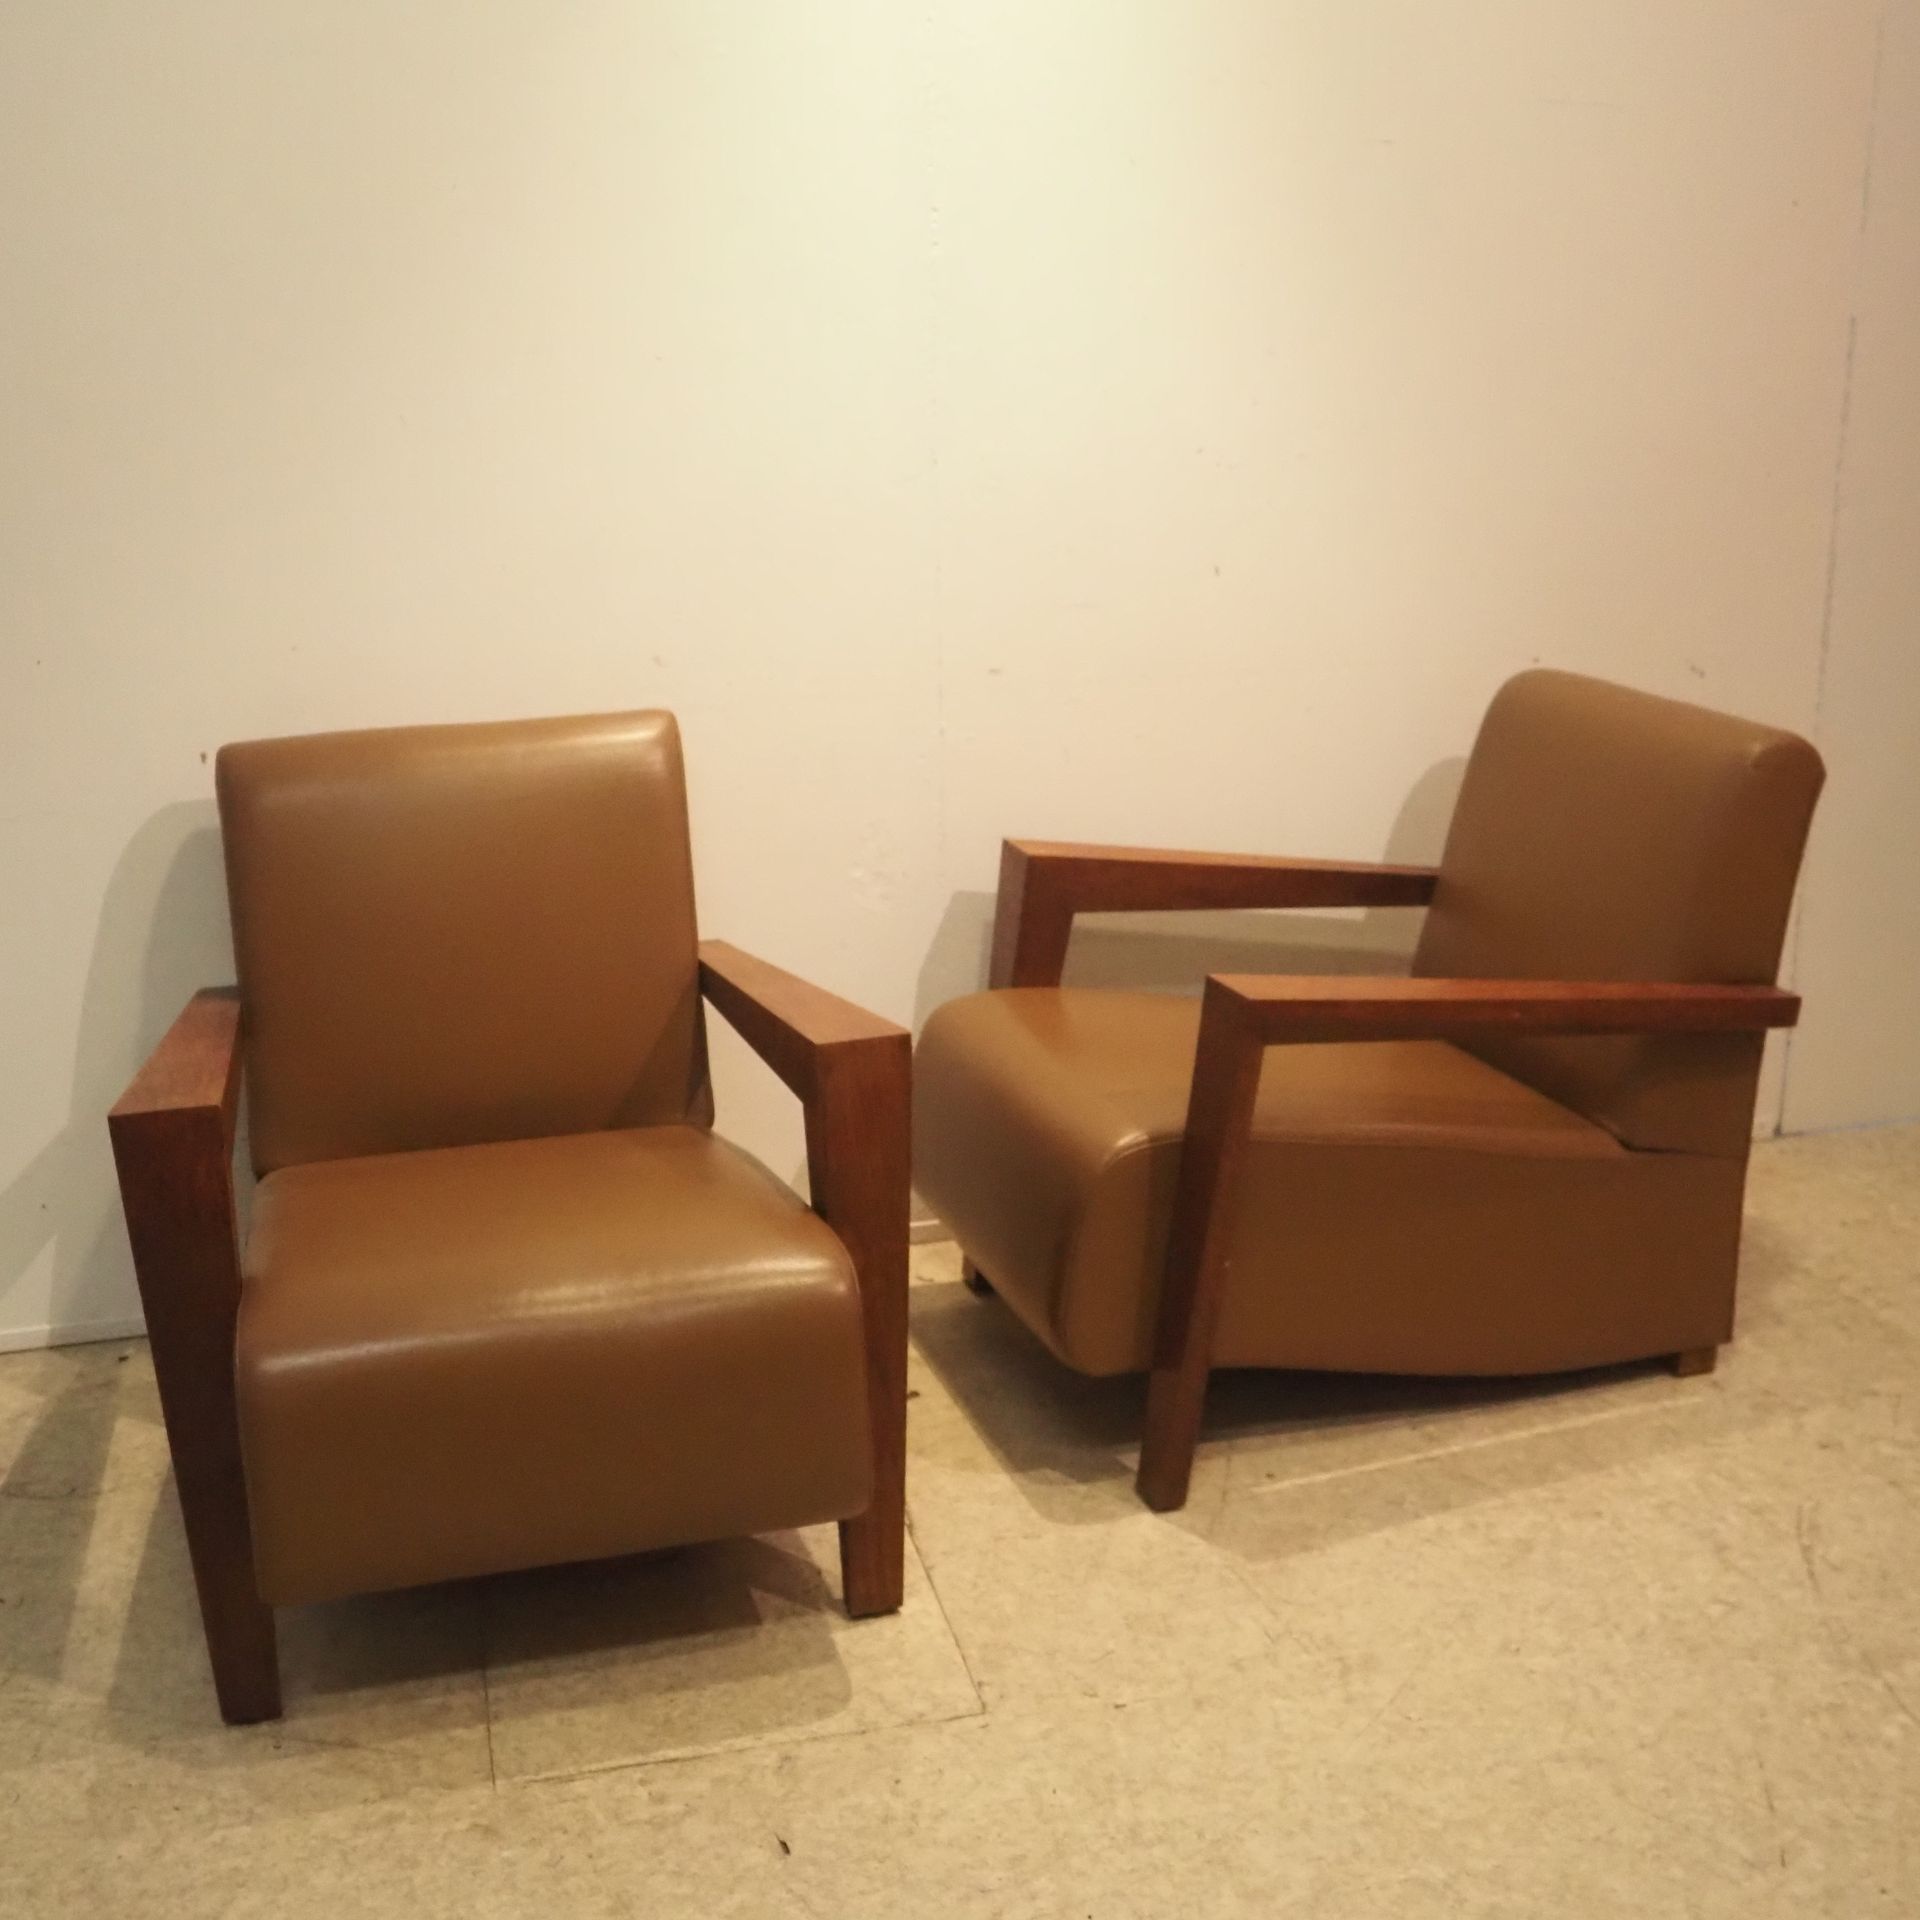 Null Leroy William : Pair of club chairs circa 2000, Art-Deco style, wooden fram&hellip;